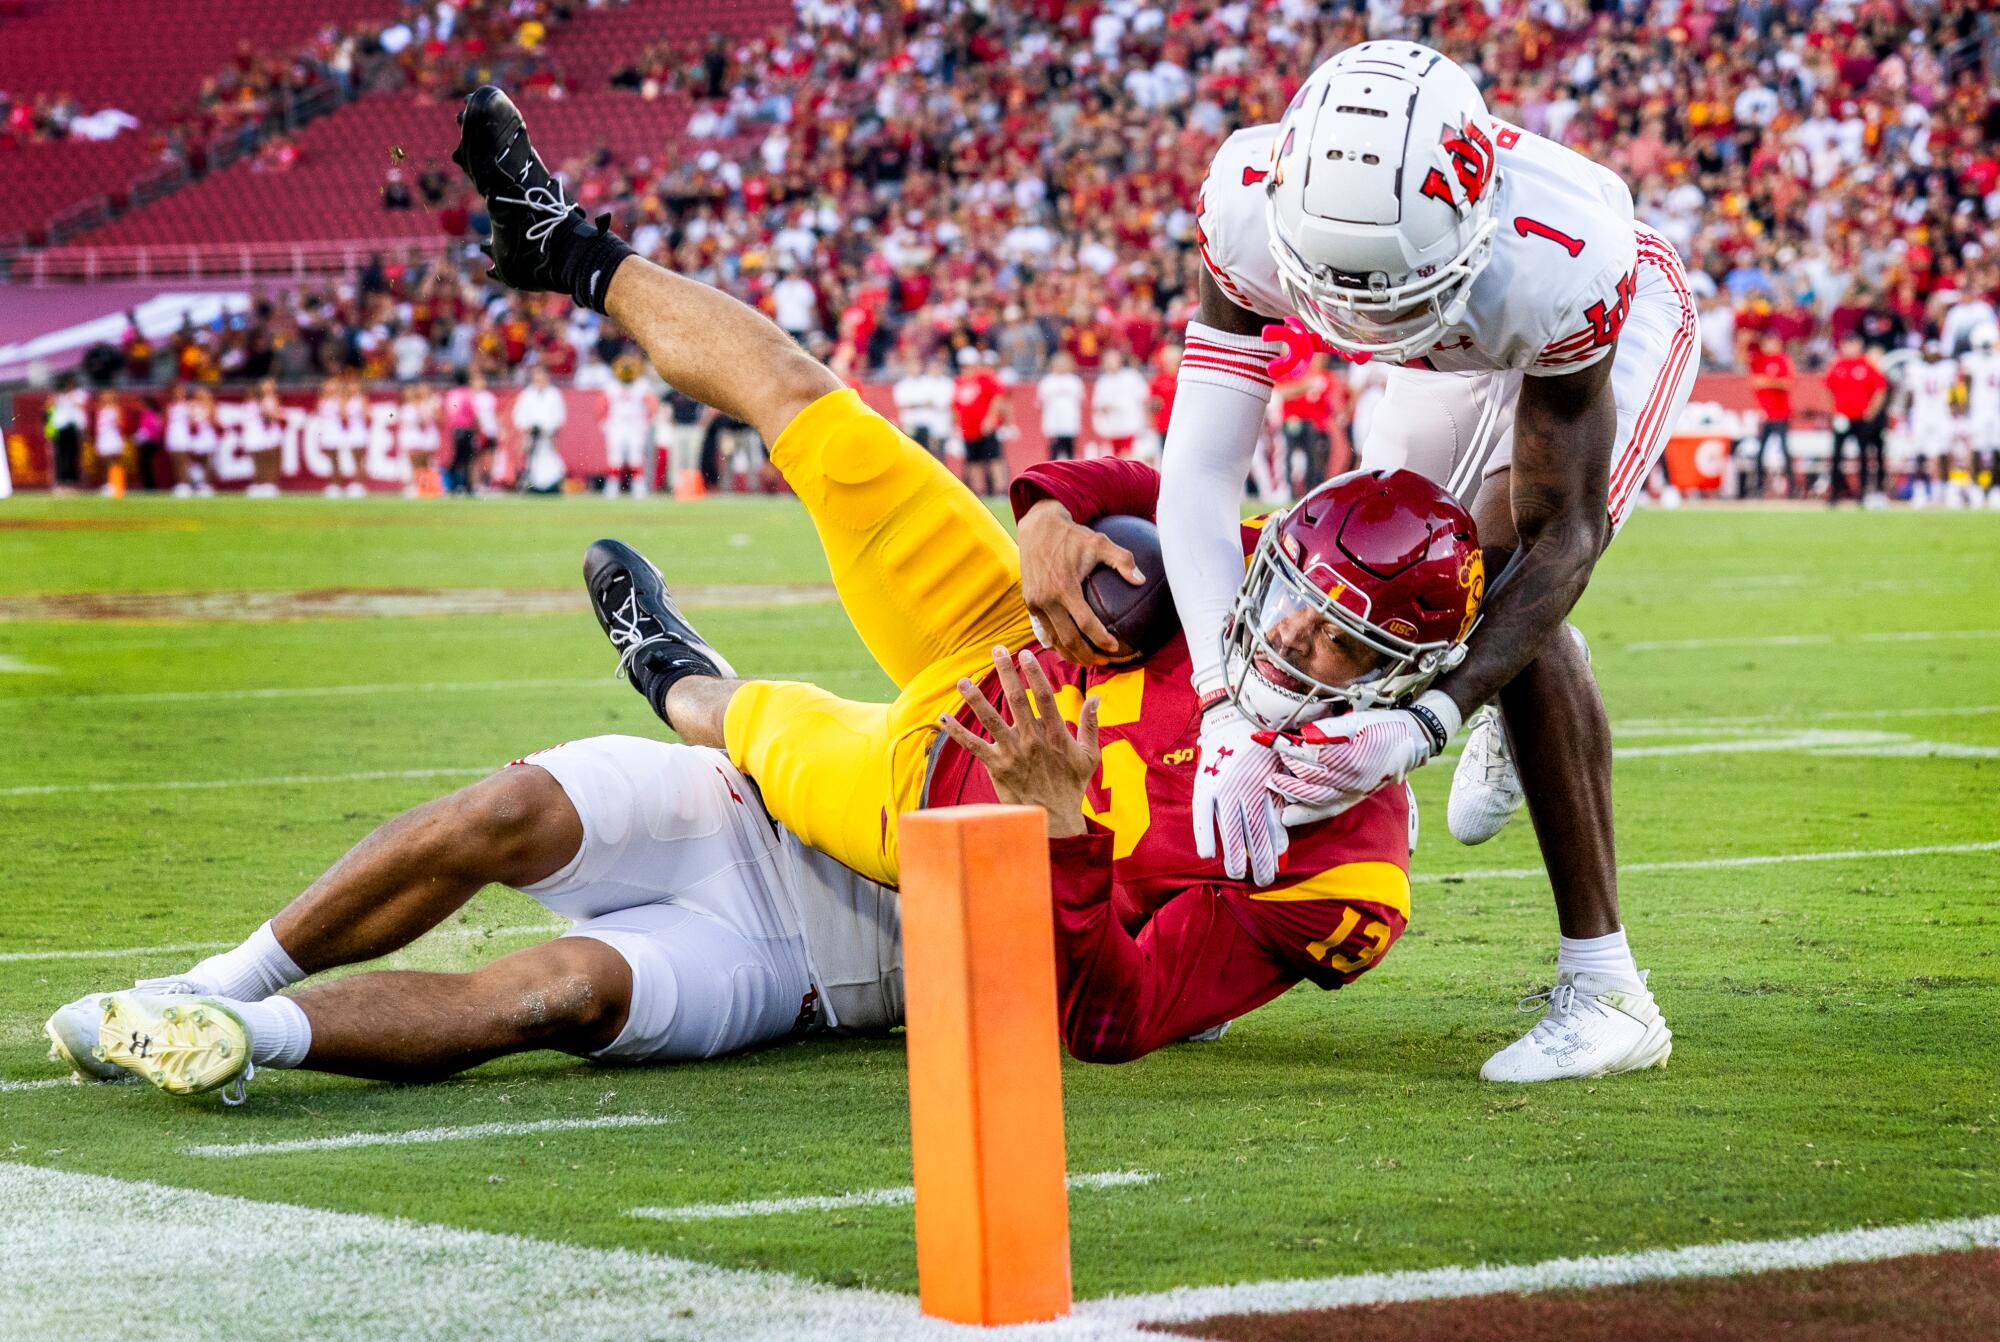 USC's Caleb Williams is stopped just short of the goal line by Utah defensive end Jonah Elliss and cornerback Miles Battle.